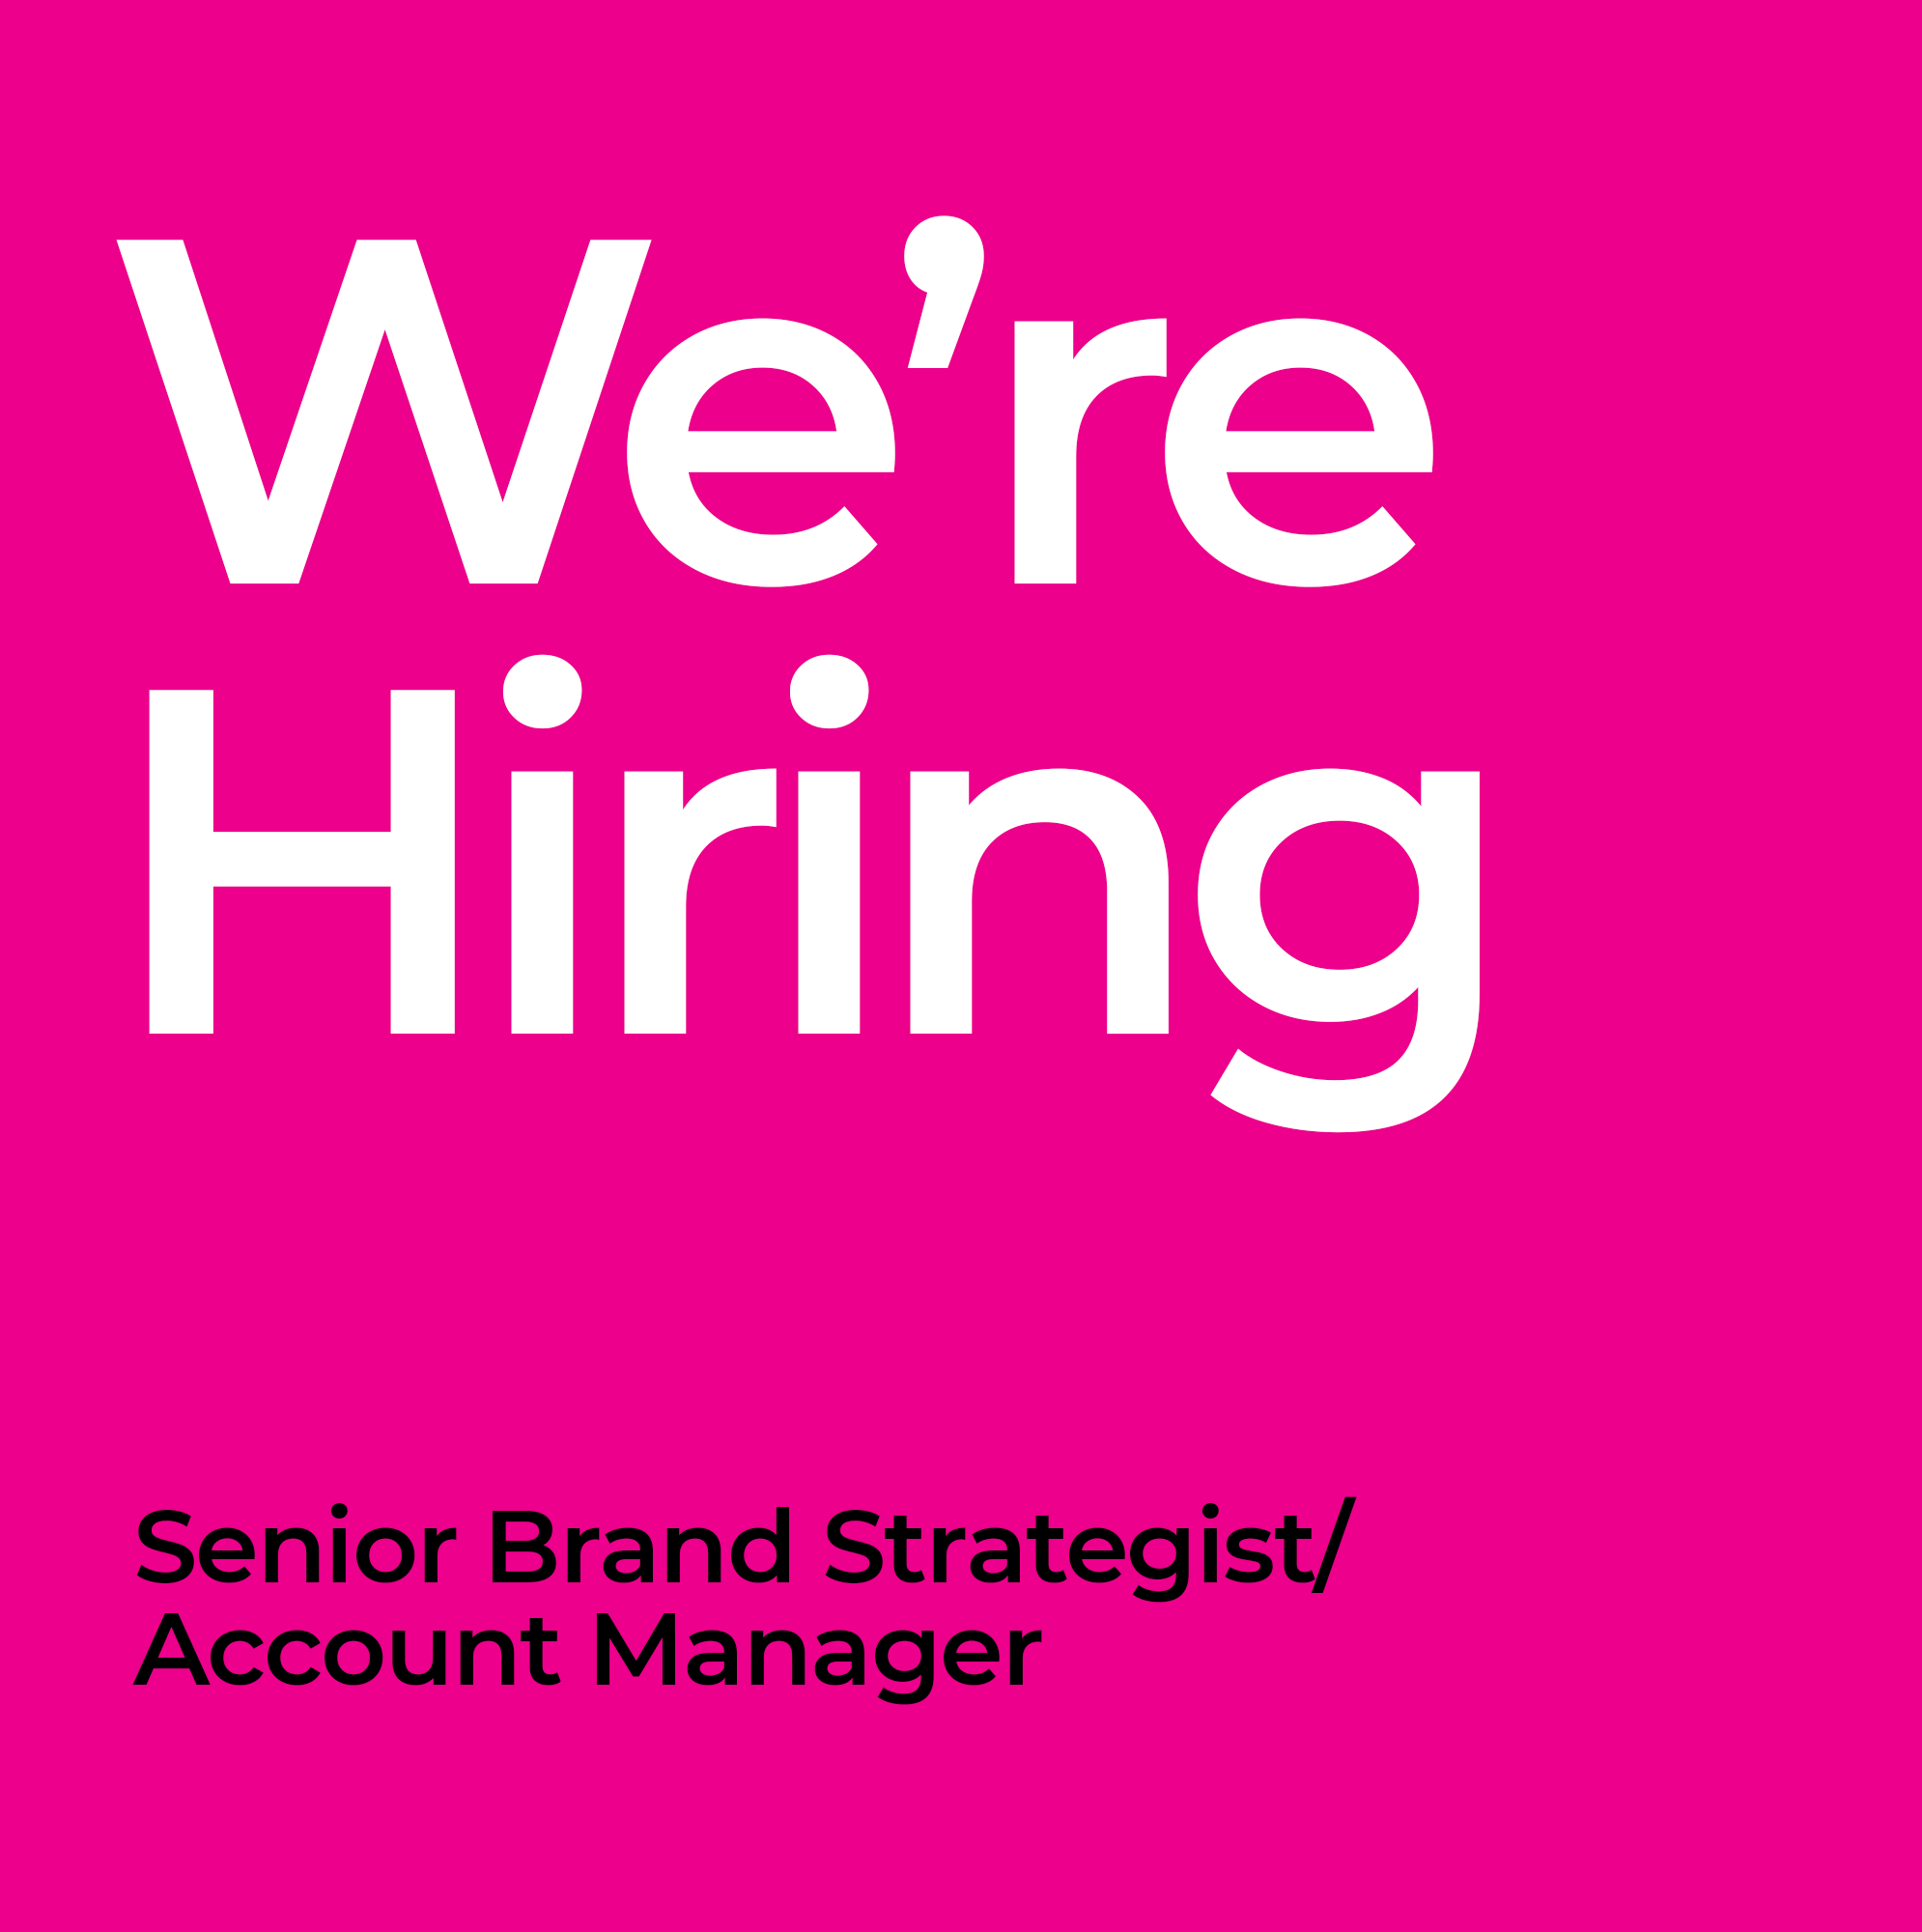 Rebrand is hiring a Brand Strategist for Auckland